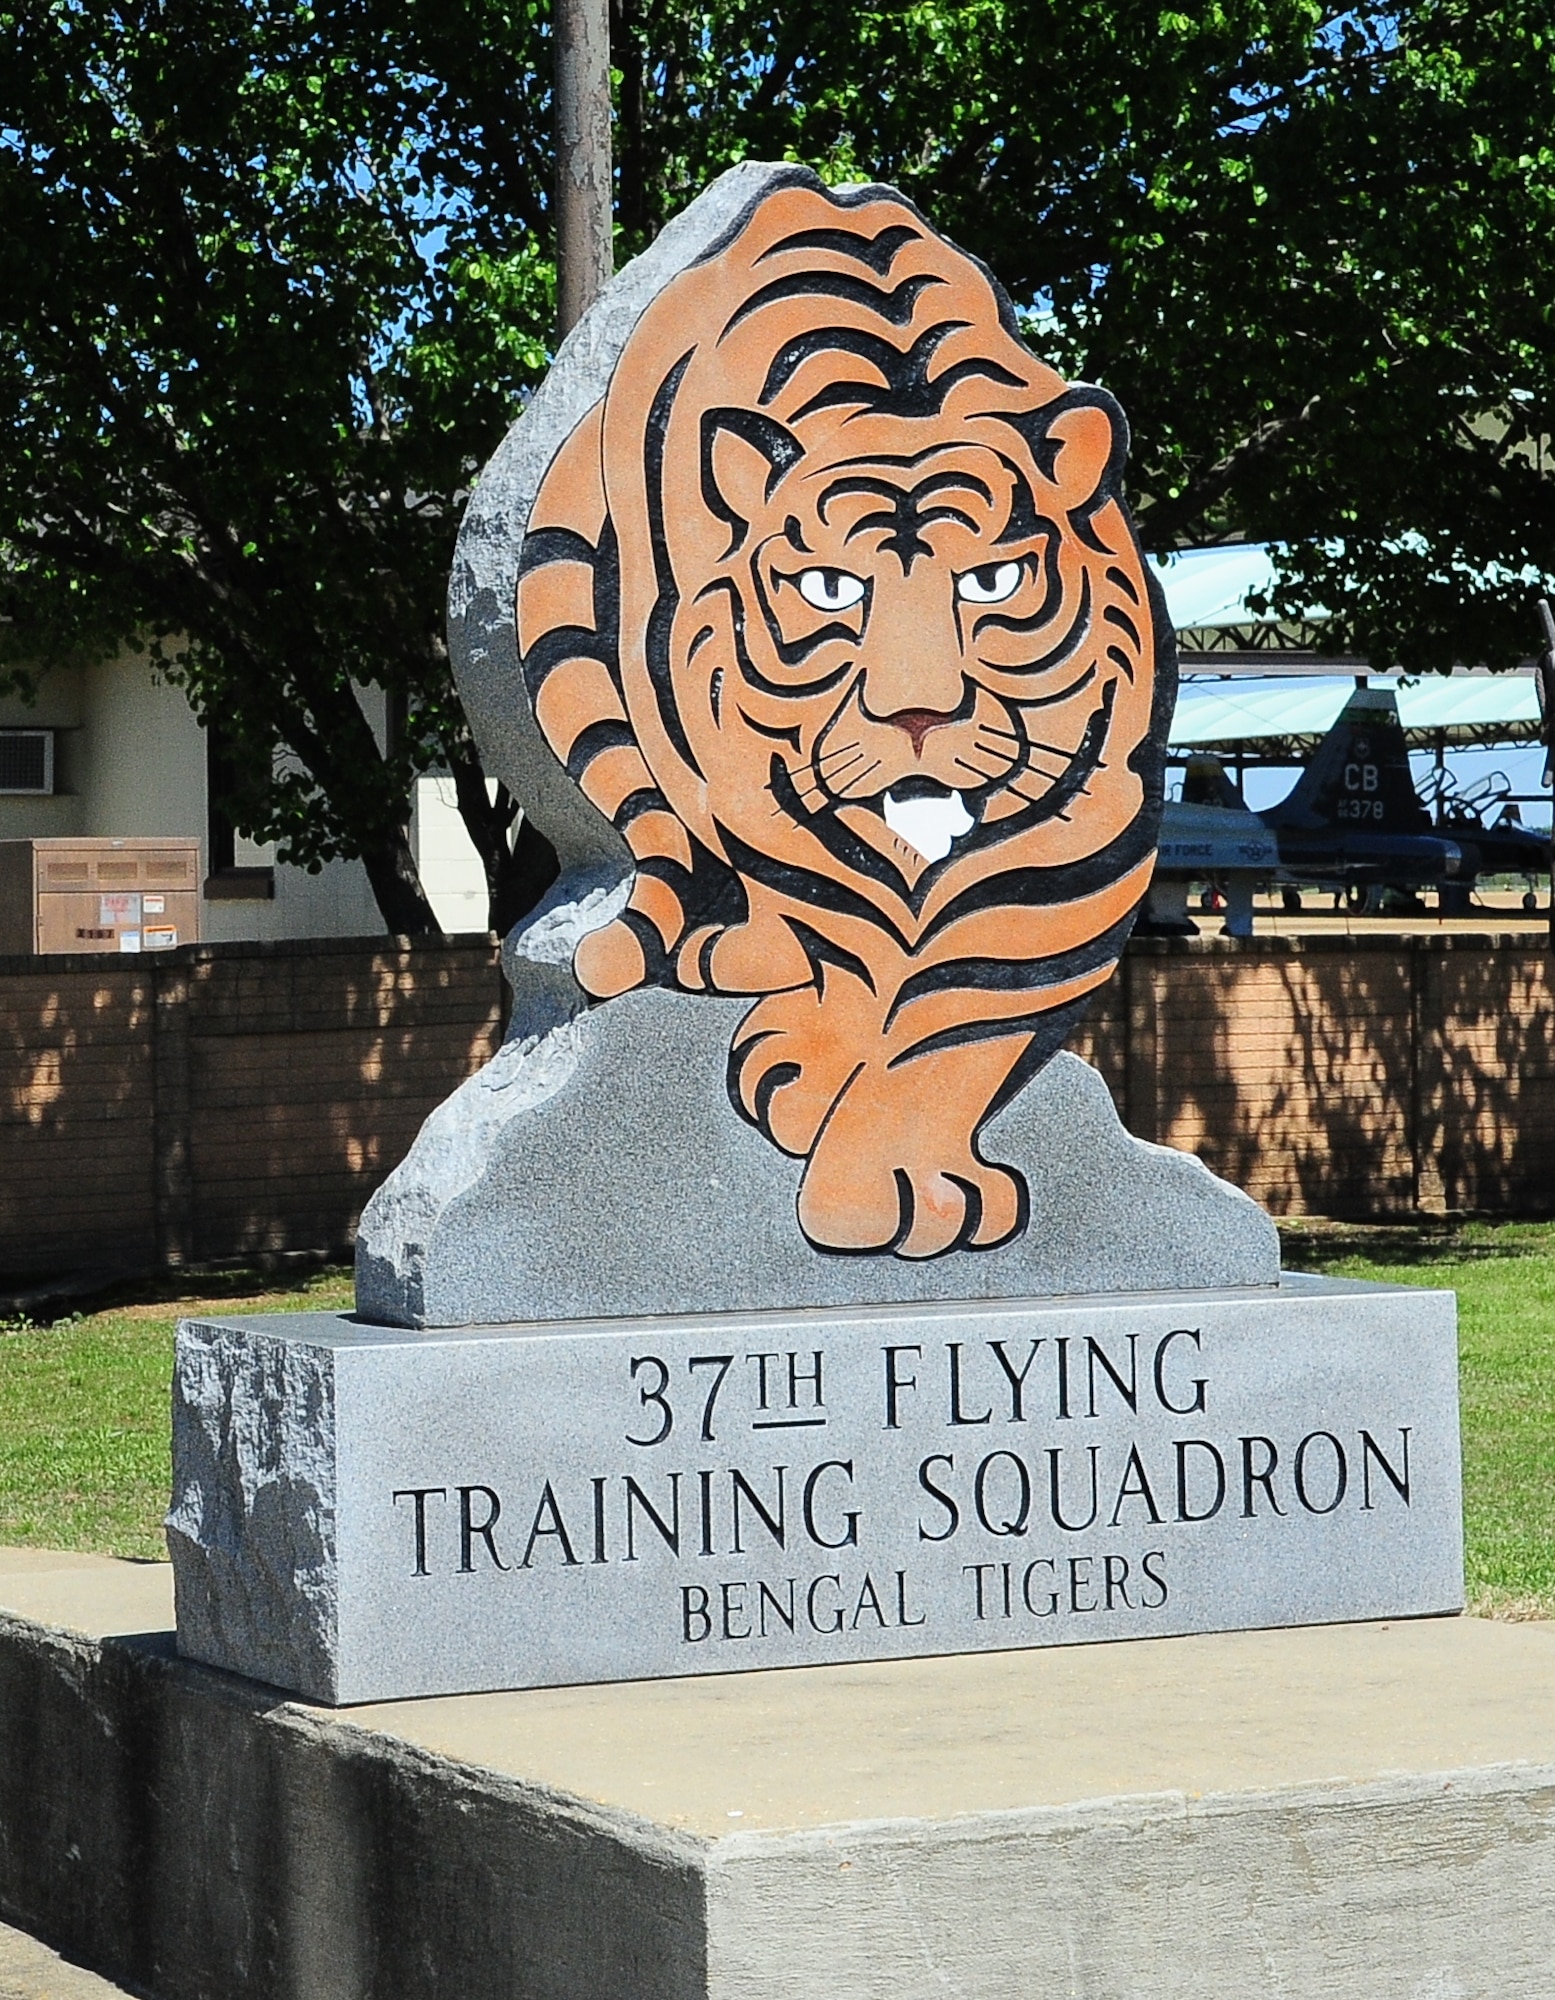 A statue of the 37th Flying Training Squadron’s Bengal Tiger mascot is displayed just outside their doors at Columbus Air Force Base, Miss., April 16, 2014. Before arriving at the 37 FTS, pilots must train through Initial Flight Screening program where they learn the basic principles of flying, although they still have very little actual flight experience by the time they arrive. (U.S. Air Force photo by Senior Airman Kaleb Snay)